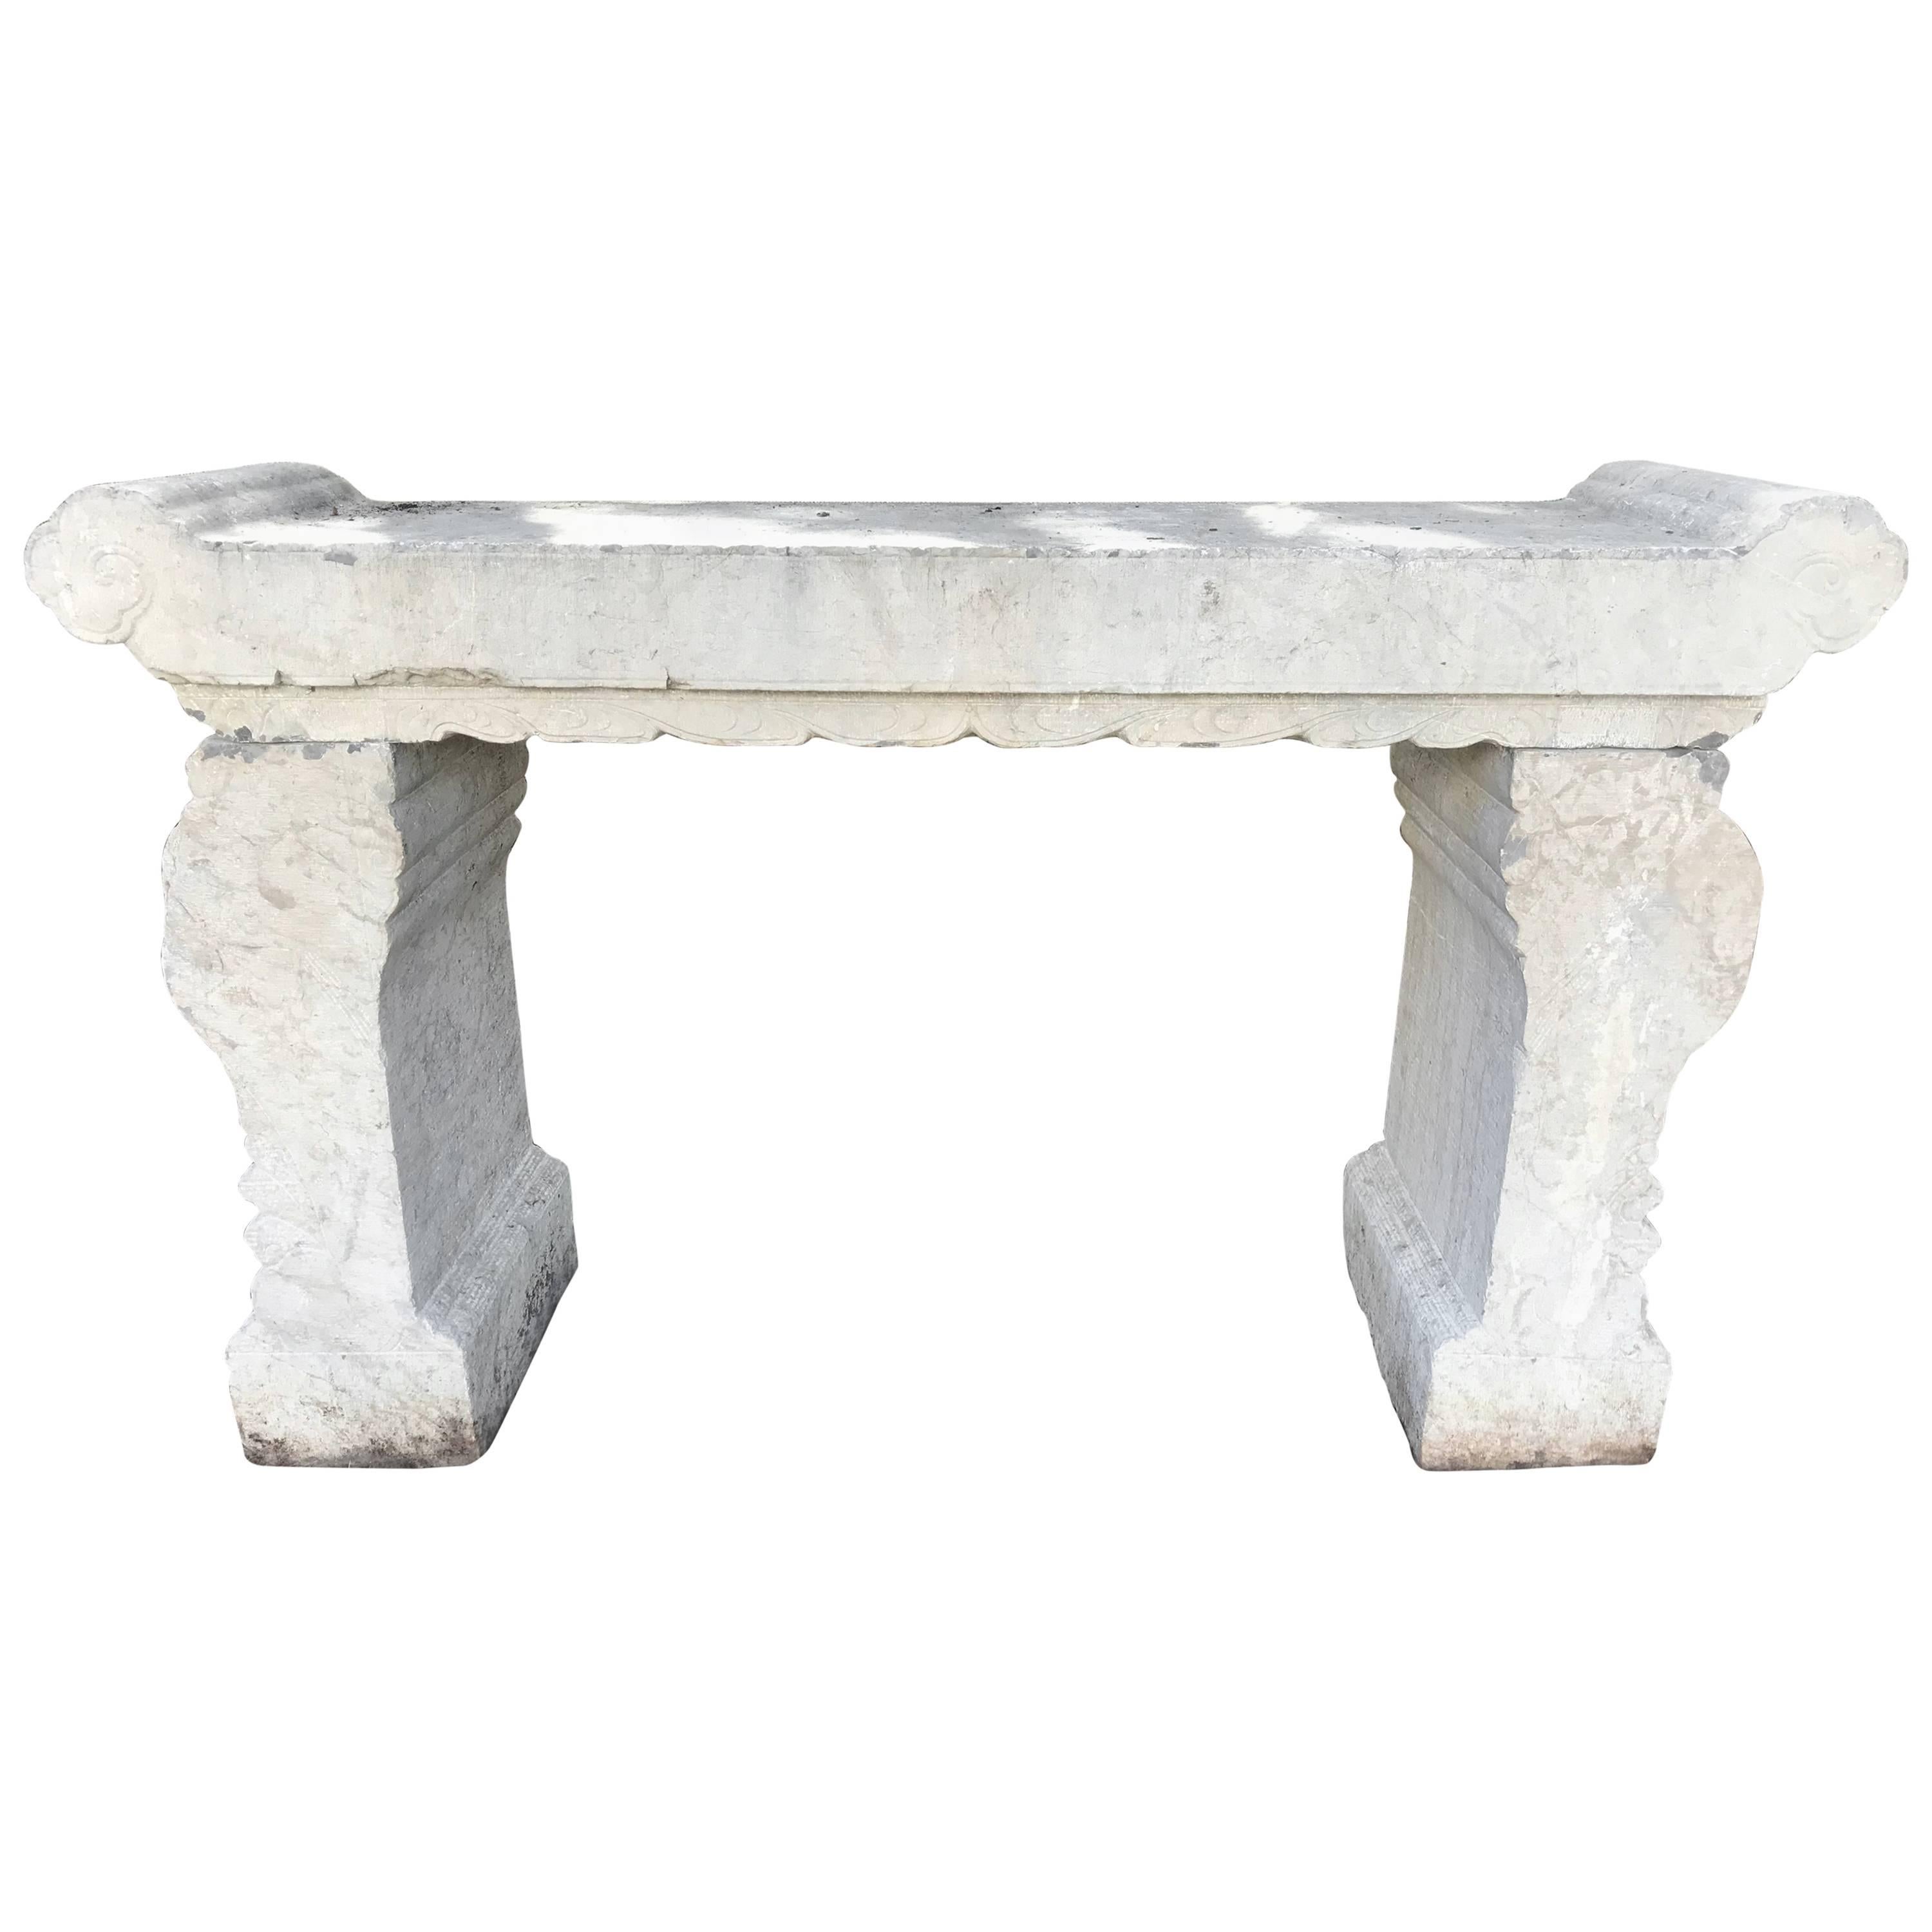 China Important Carved Stone "Penjing" Garden Table, Qing Dynasty ‘1644-1911’ For Sale